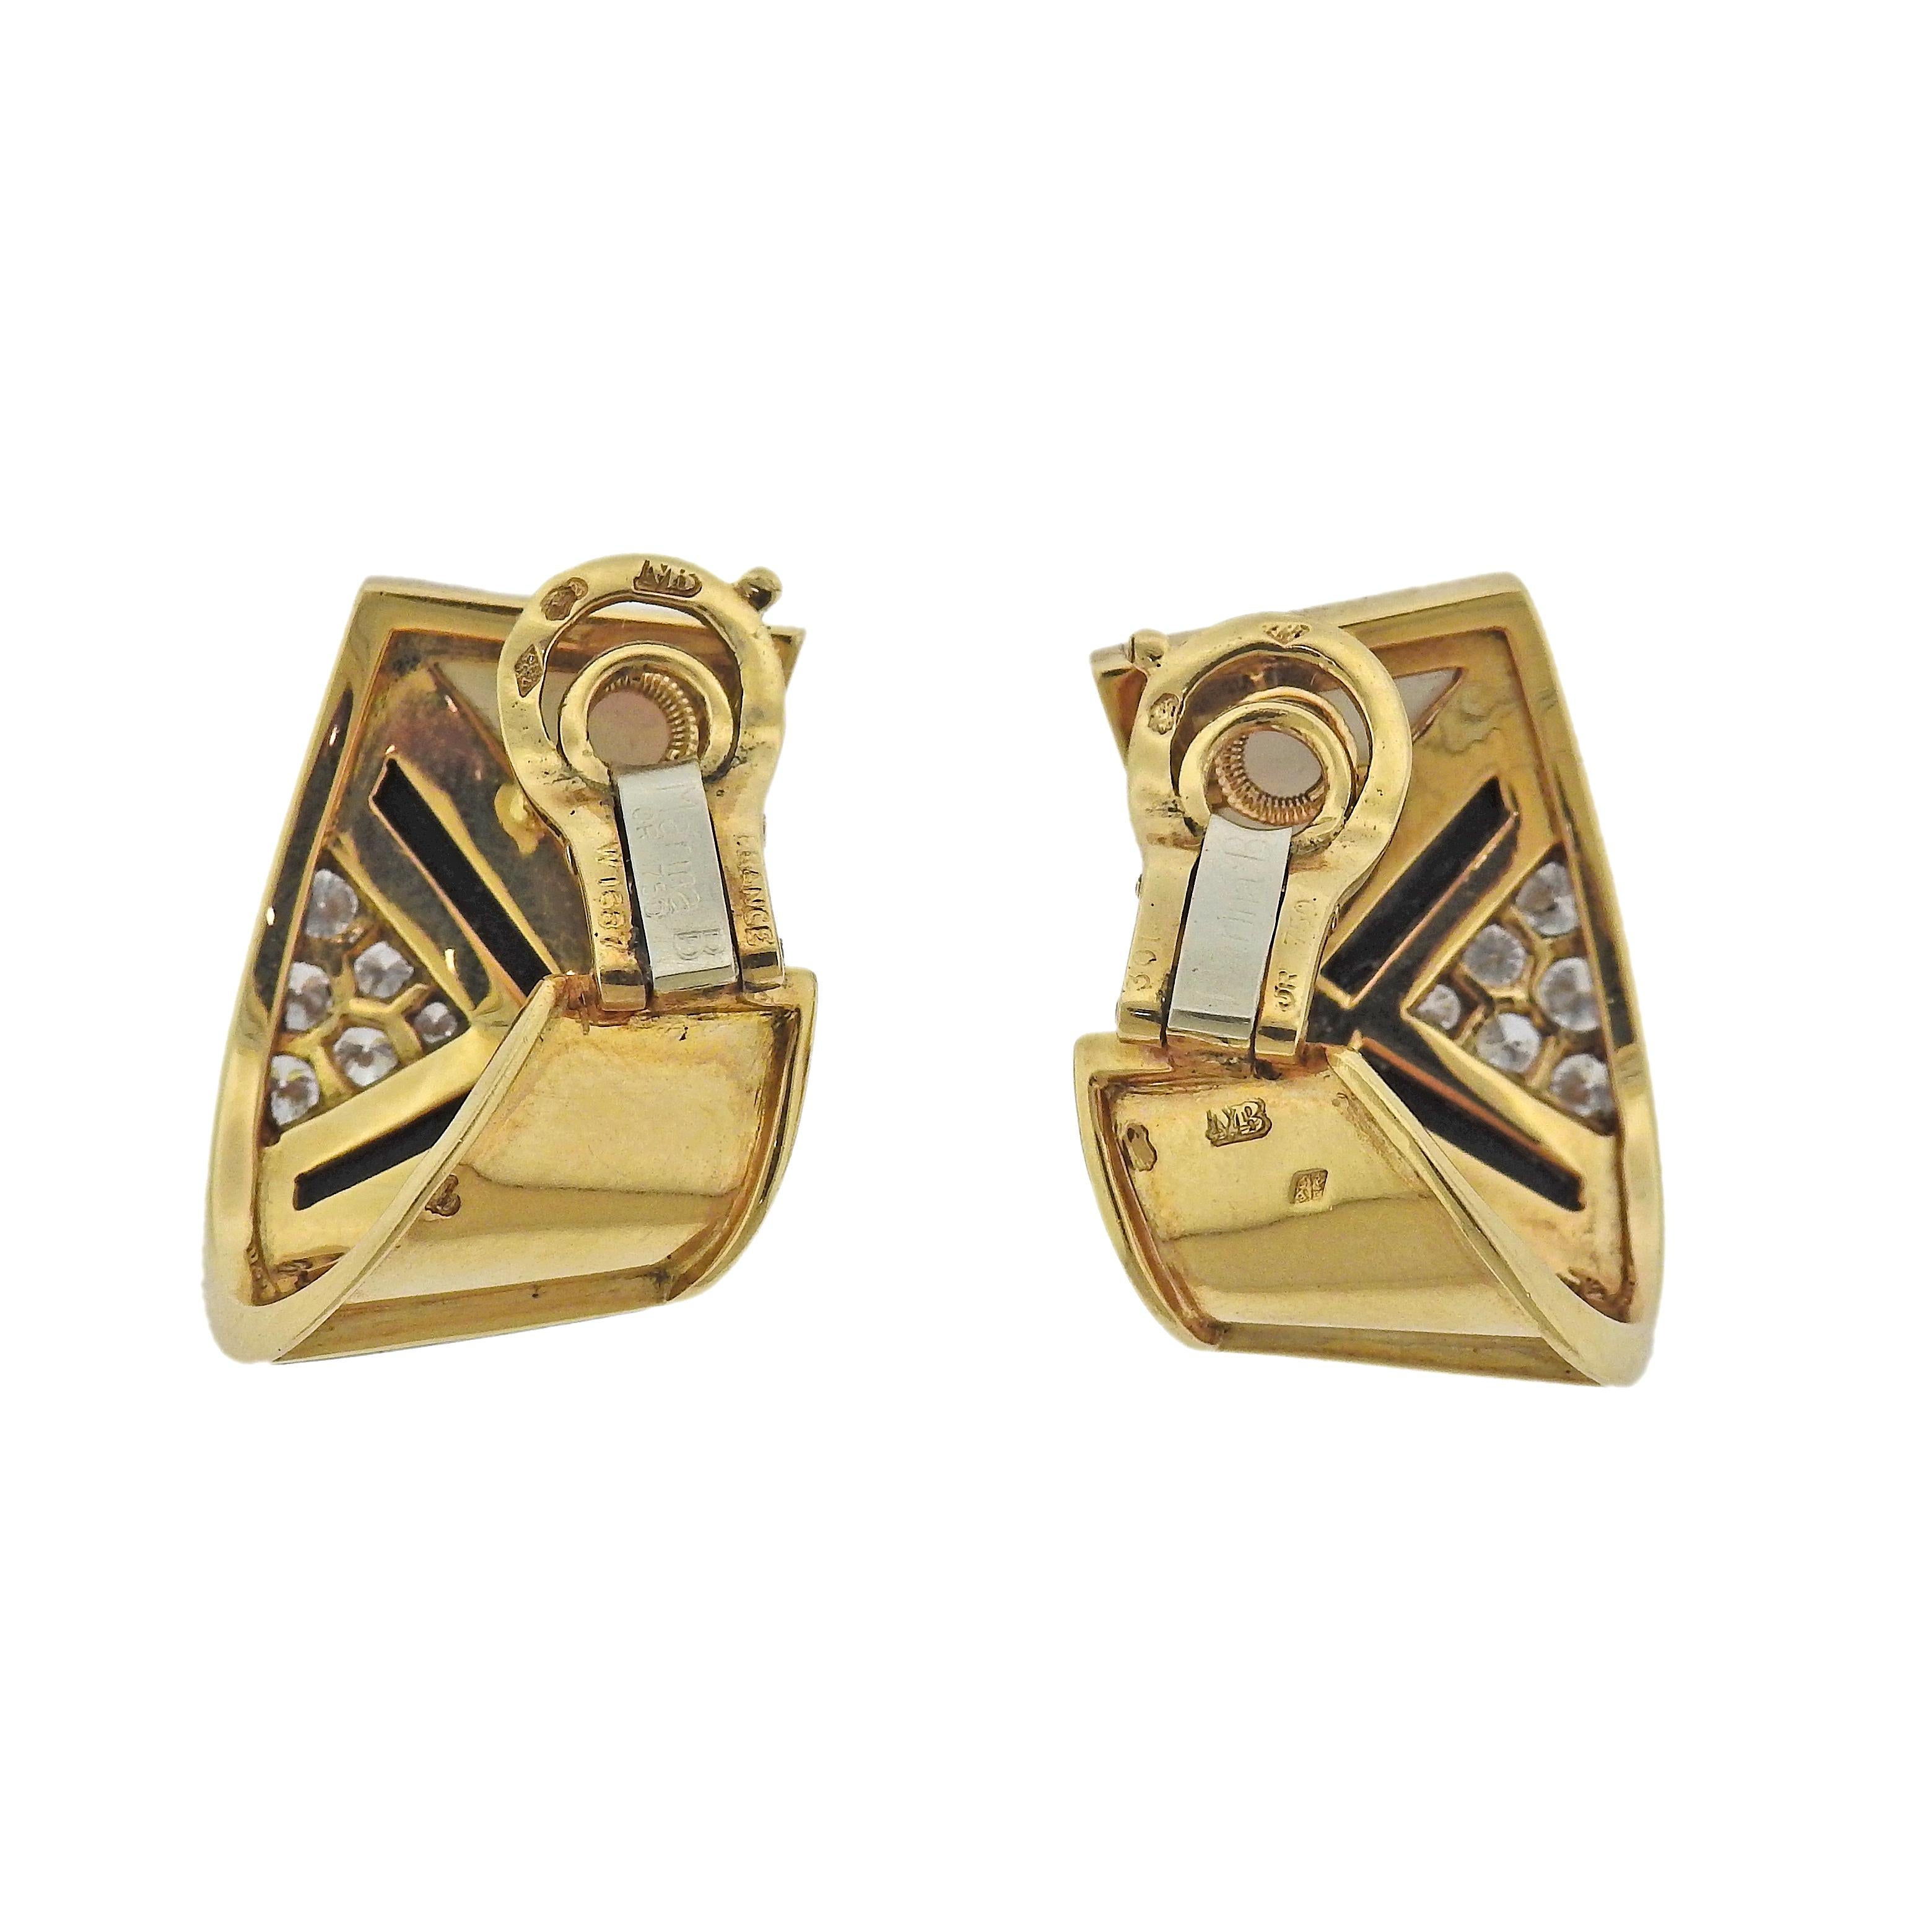 Pair of 18k gold earrings by Marina B, with onyx and mother of pearl inlay, surrounded with approx. 0.56ctw in G/VS diamonds. Earrings are 25mm x 15mm. Marked: Marina, B, MB, 750, W 1667. Weight - 15.1 grams.